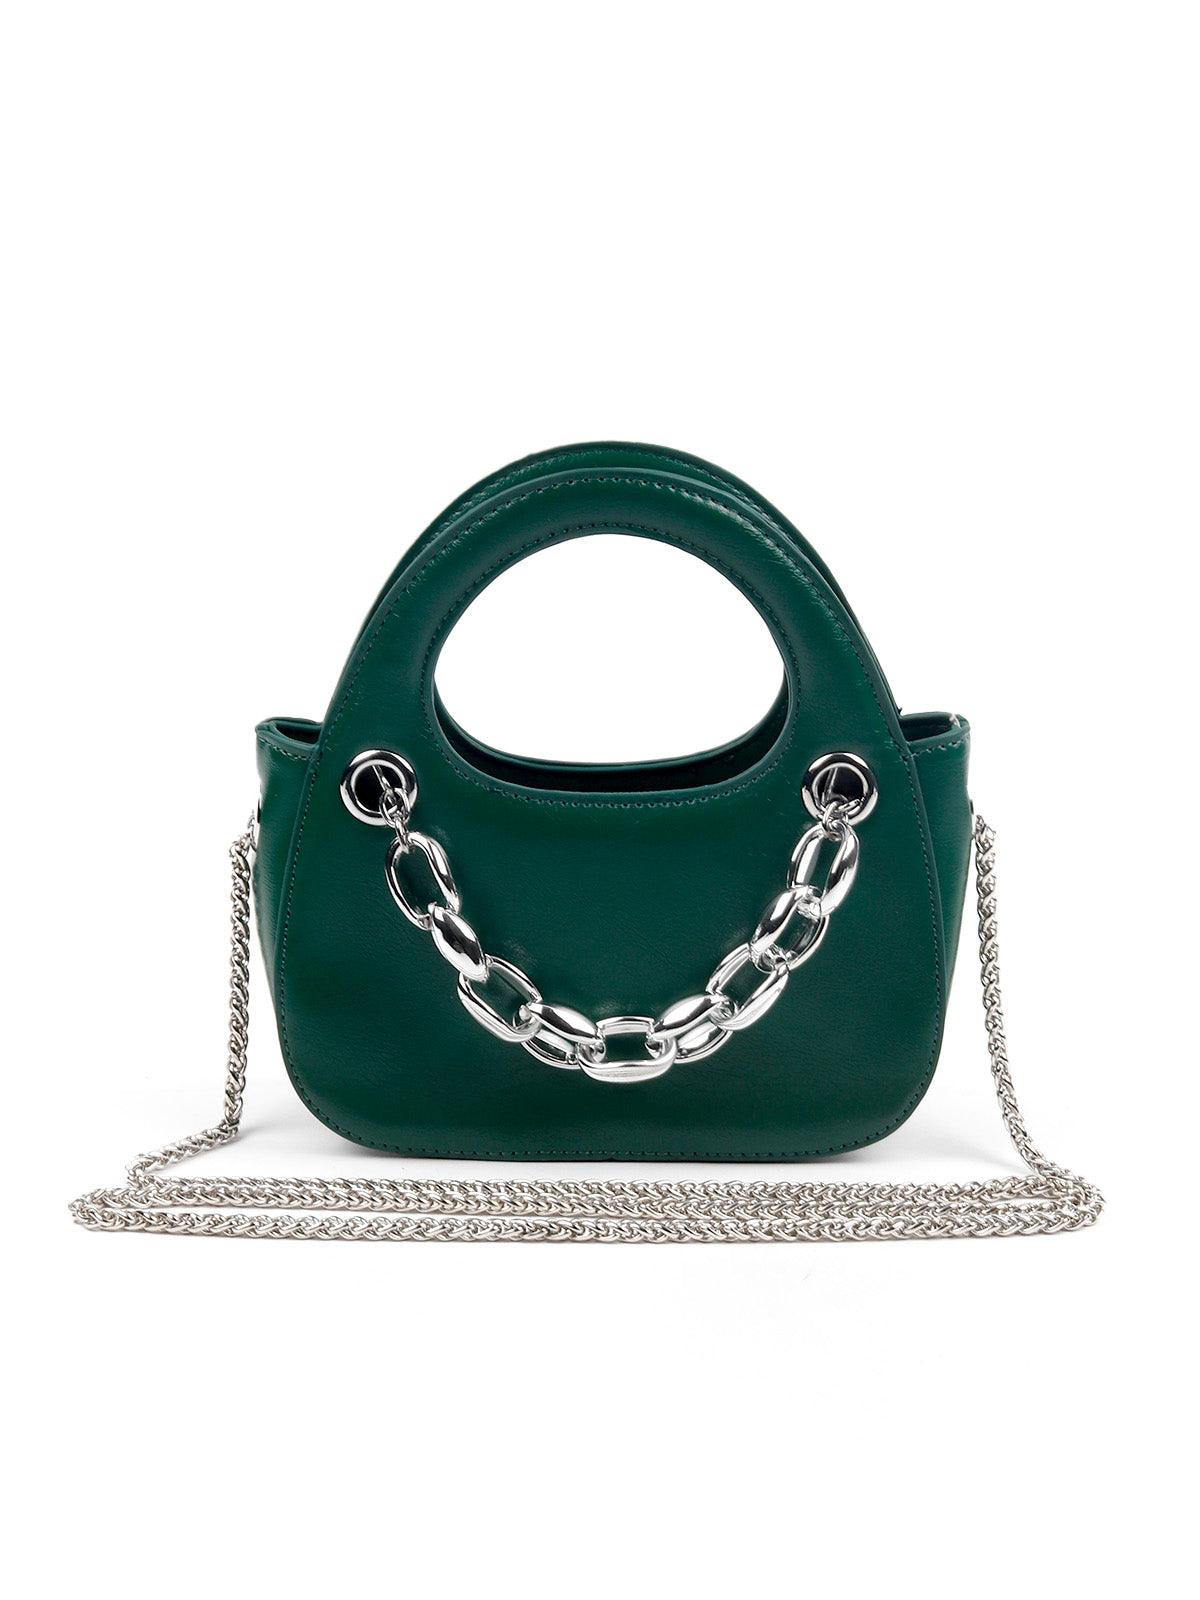 THE VERY SMART GREEN CLUTCH BAG - Odette